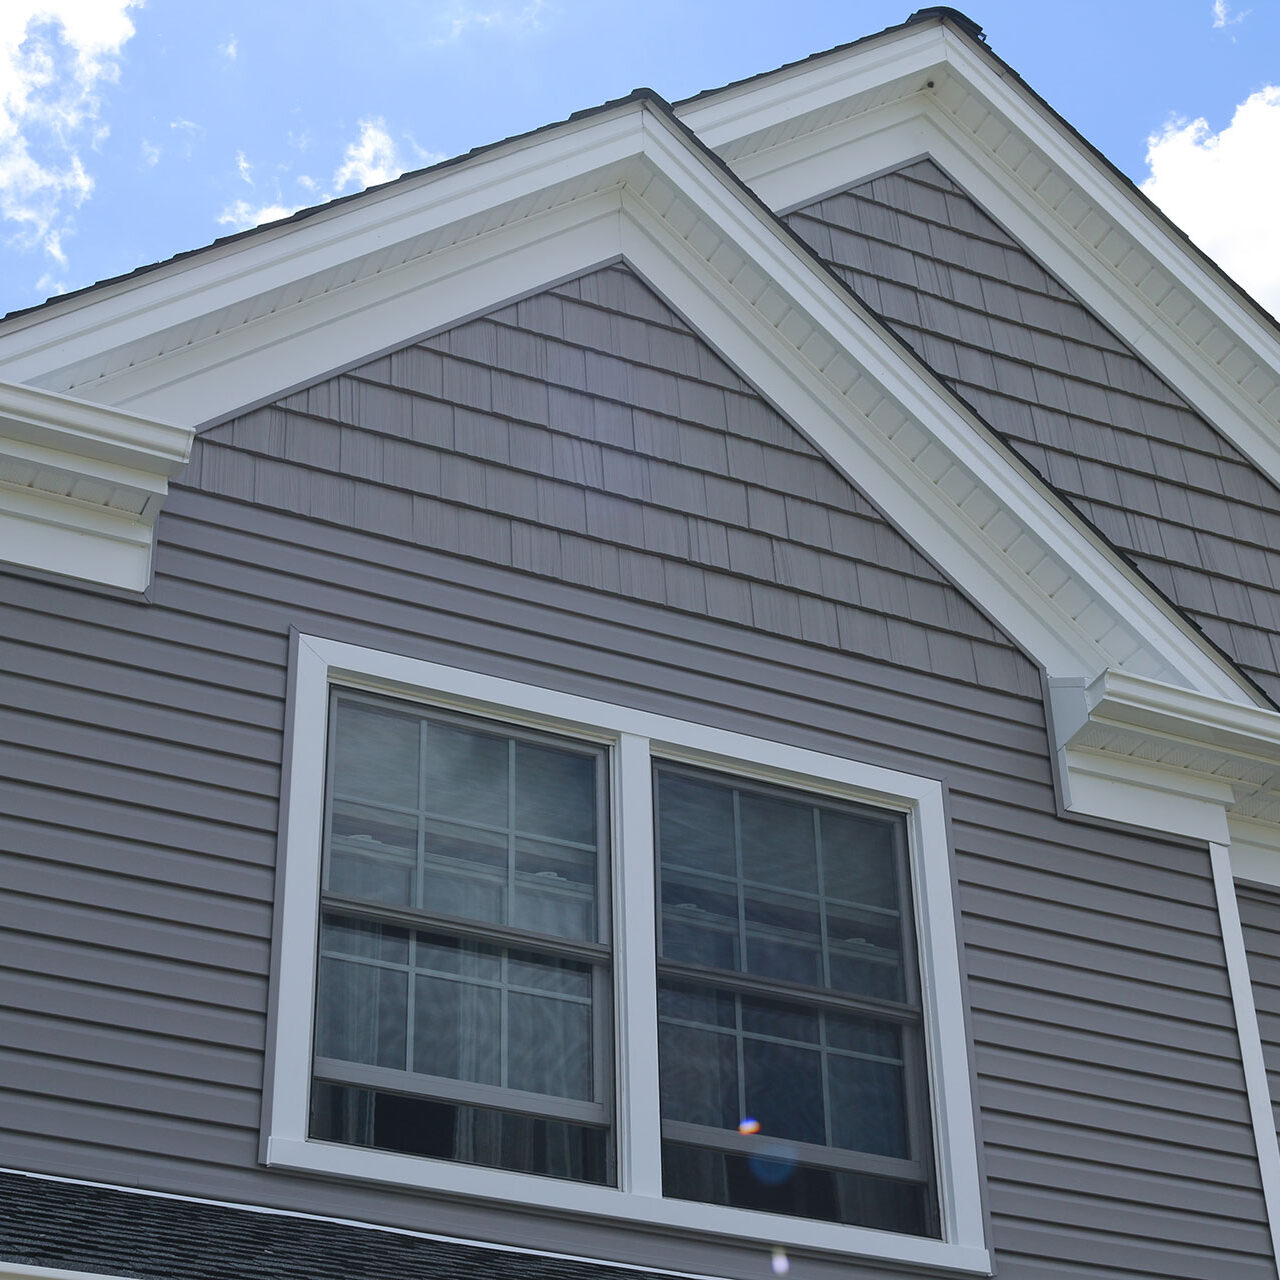 Example of a Vinyl Siding Project in Kansas City